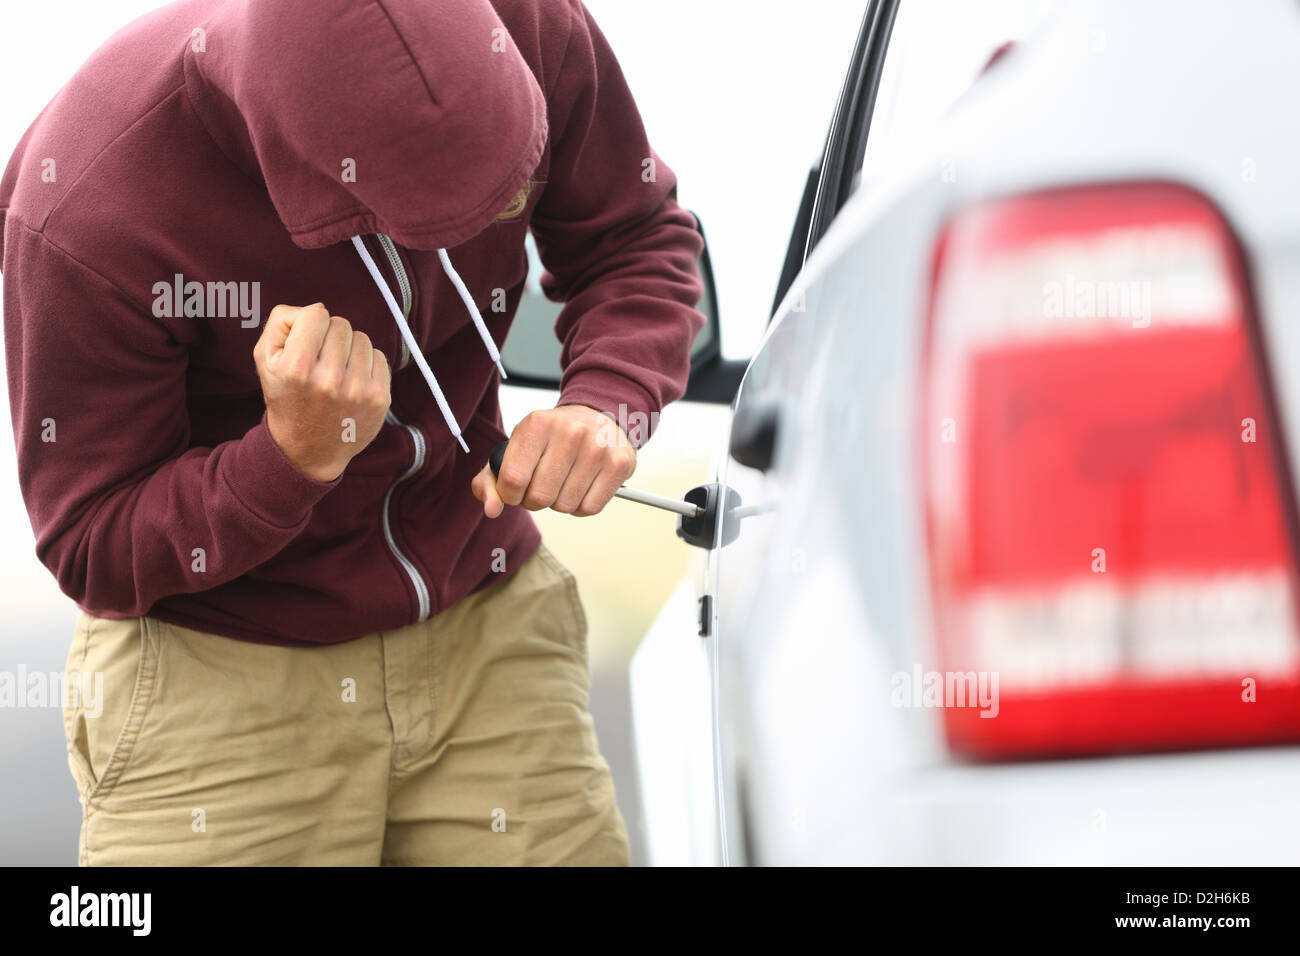 View down the side of a car to a man in a hooded top breaking into a car with a screwdriver in order to steal it Stock Photo